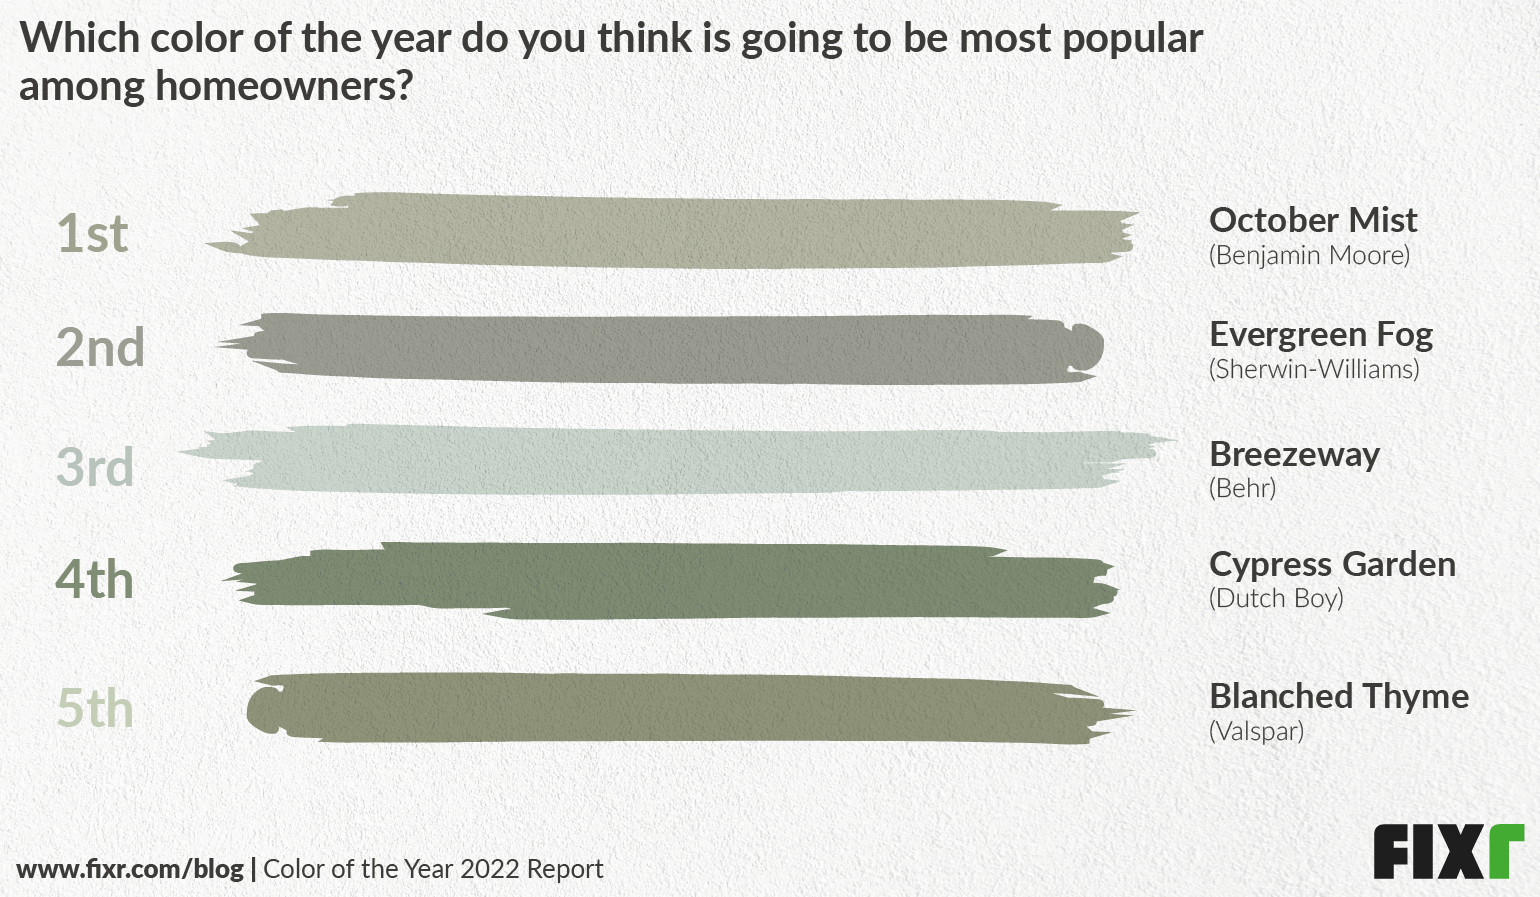 Most popular colors of the year 2022